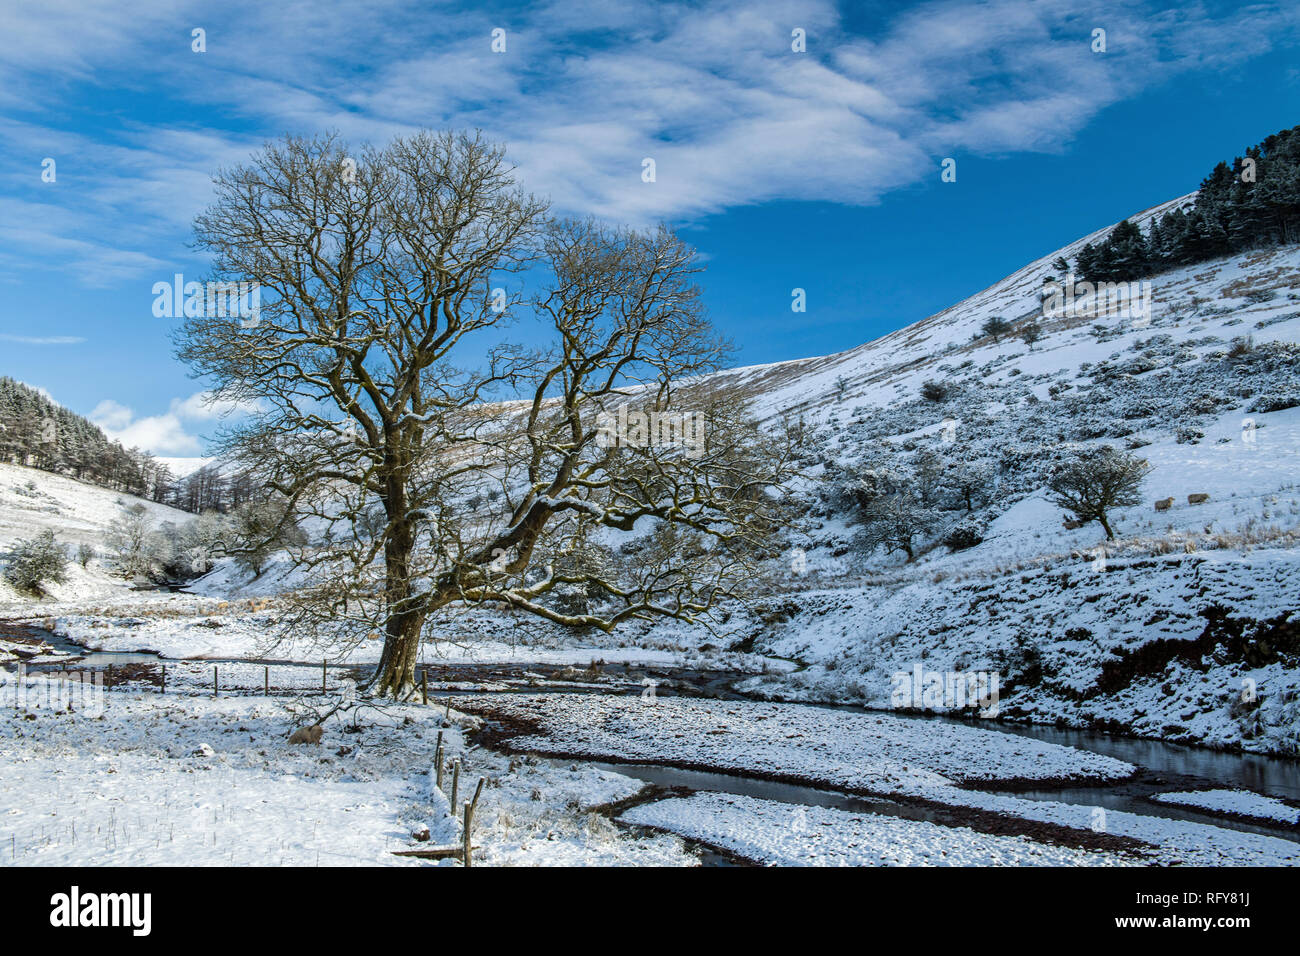 The oak tree at Cwm Crew in the Brecon Beacons on a sunny winter day after a snowfall, Powys, South Wales, with blue sky and white clouds. Stock Photo